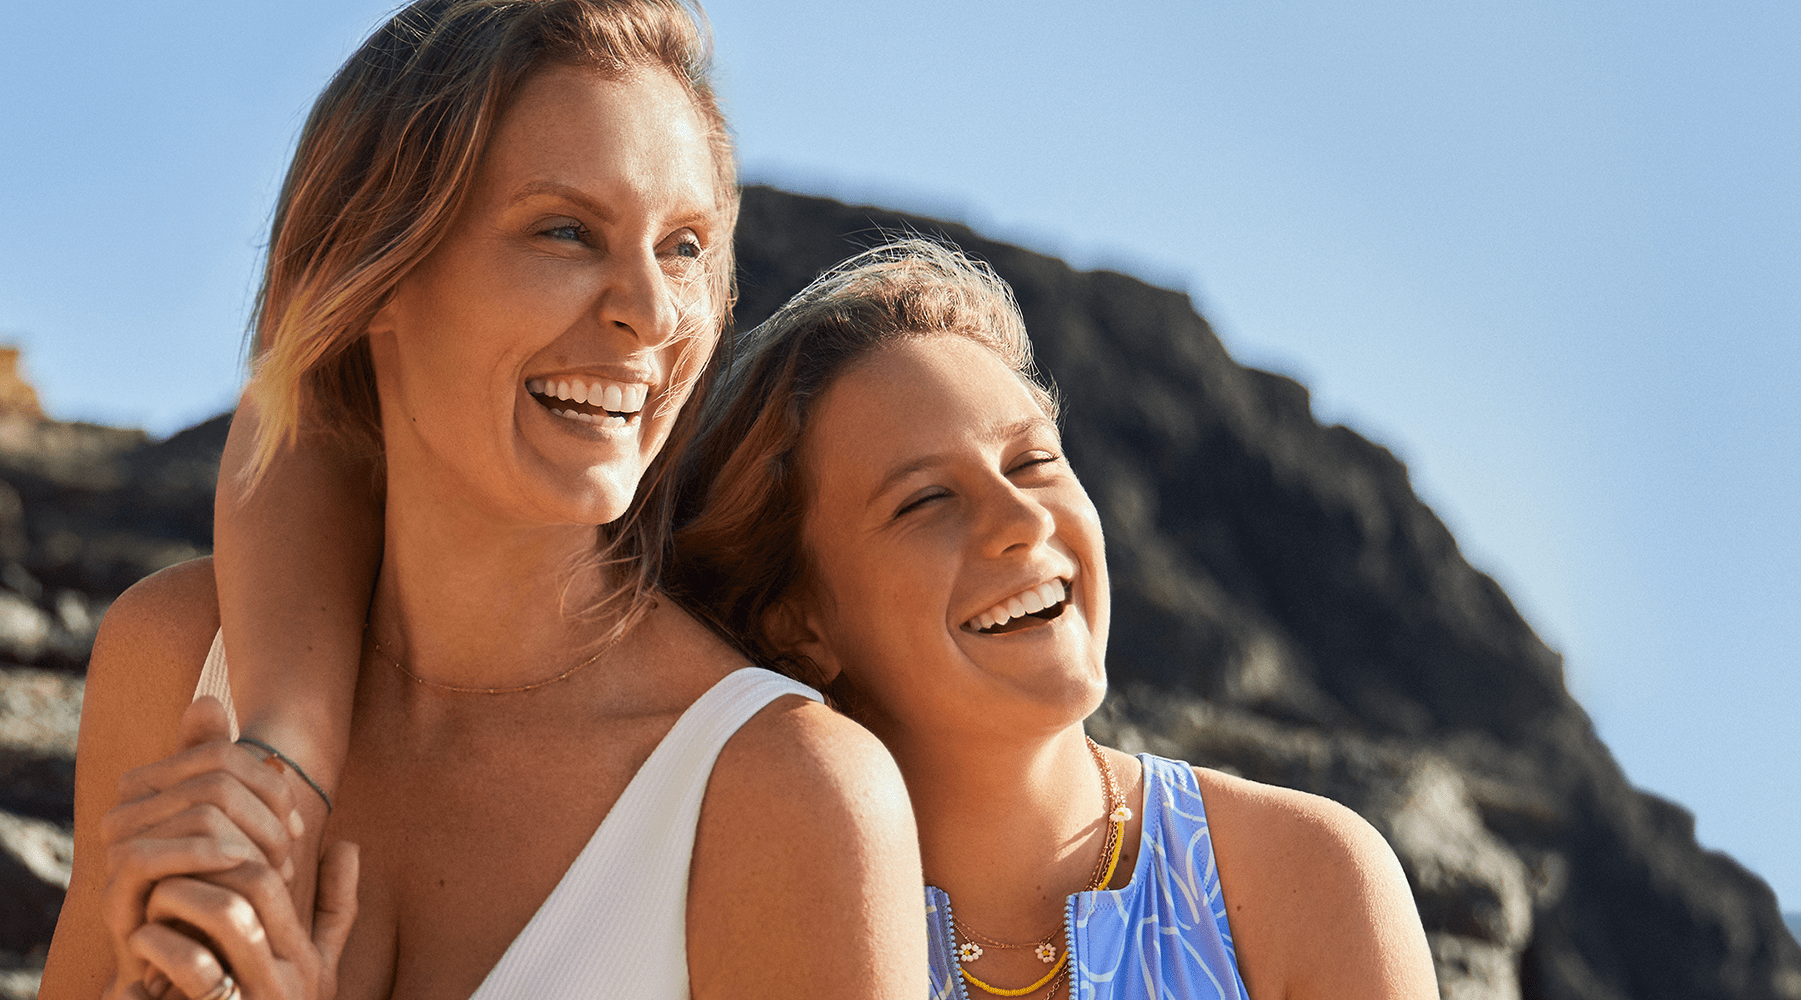 The image represents two women, happy to be ready for the summer sun with Nivea sun protection creams